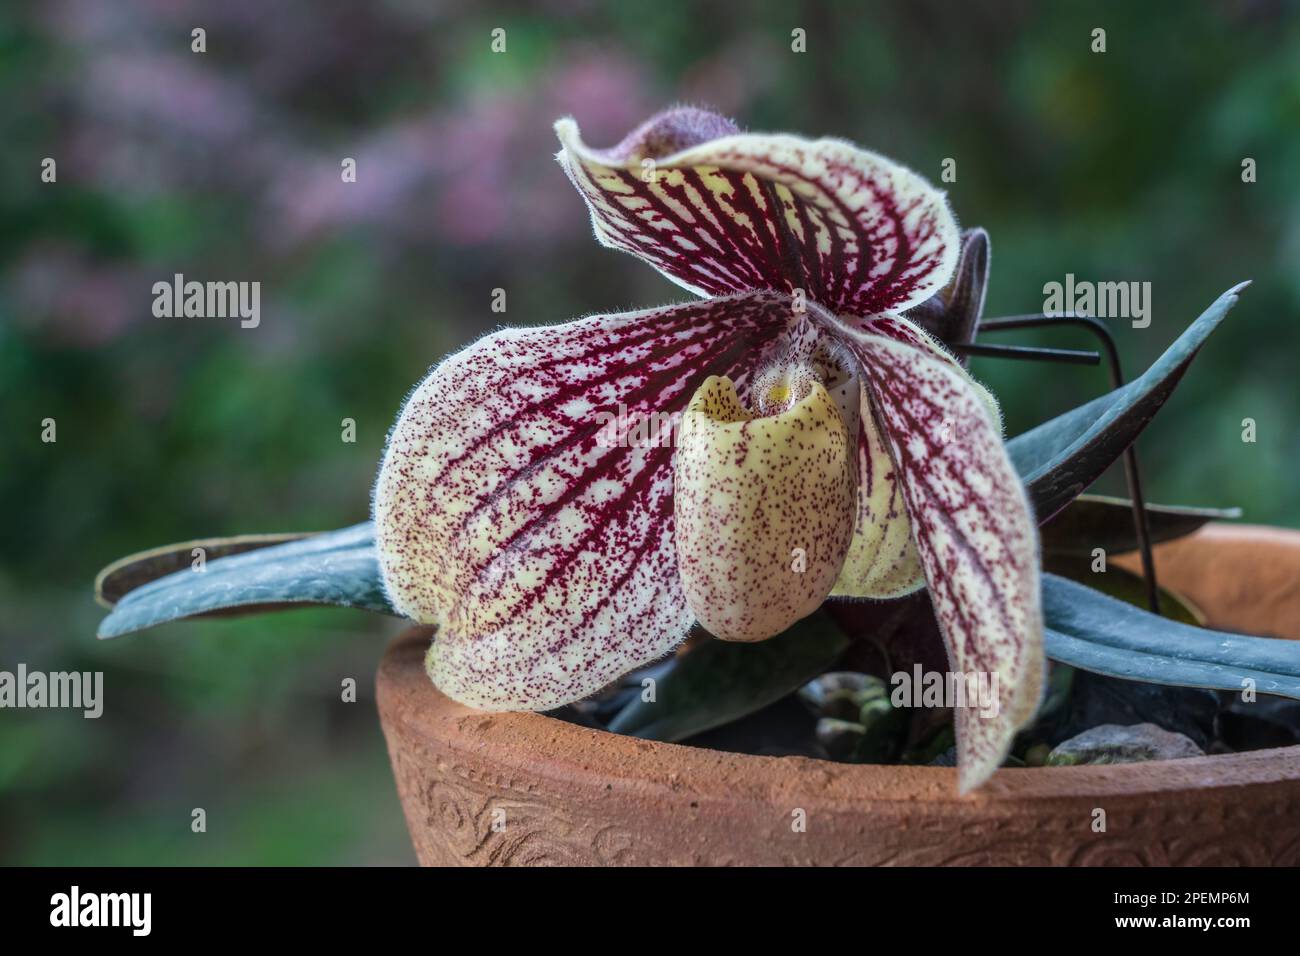 Closeup view of purple red and creamy white flower of lady slipper orchid species paphiopedilum myanmaricum blooming outdoors on natural background Stock Photo